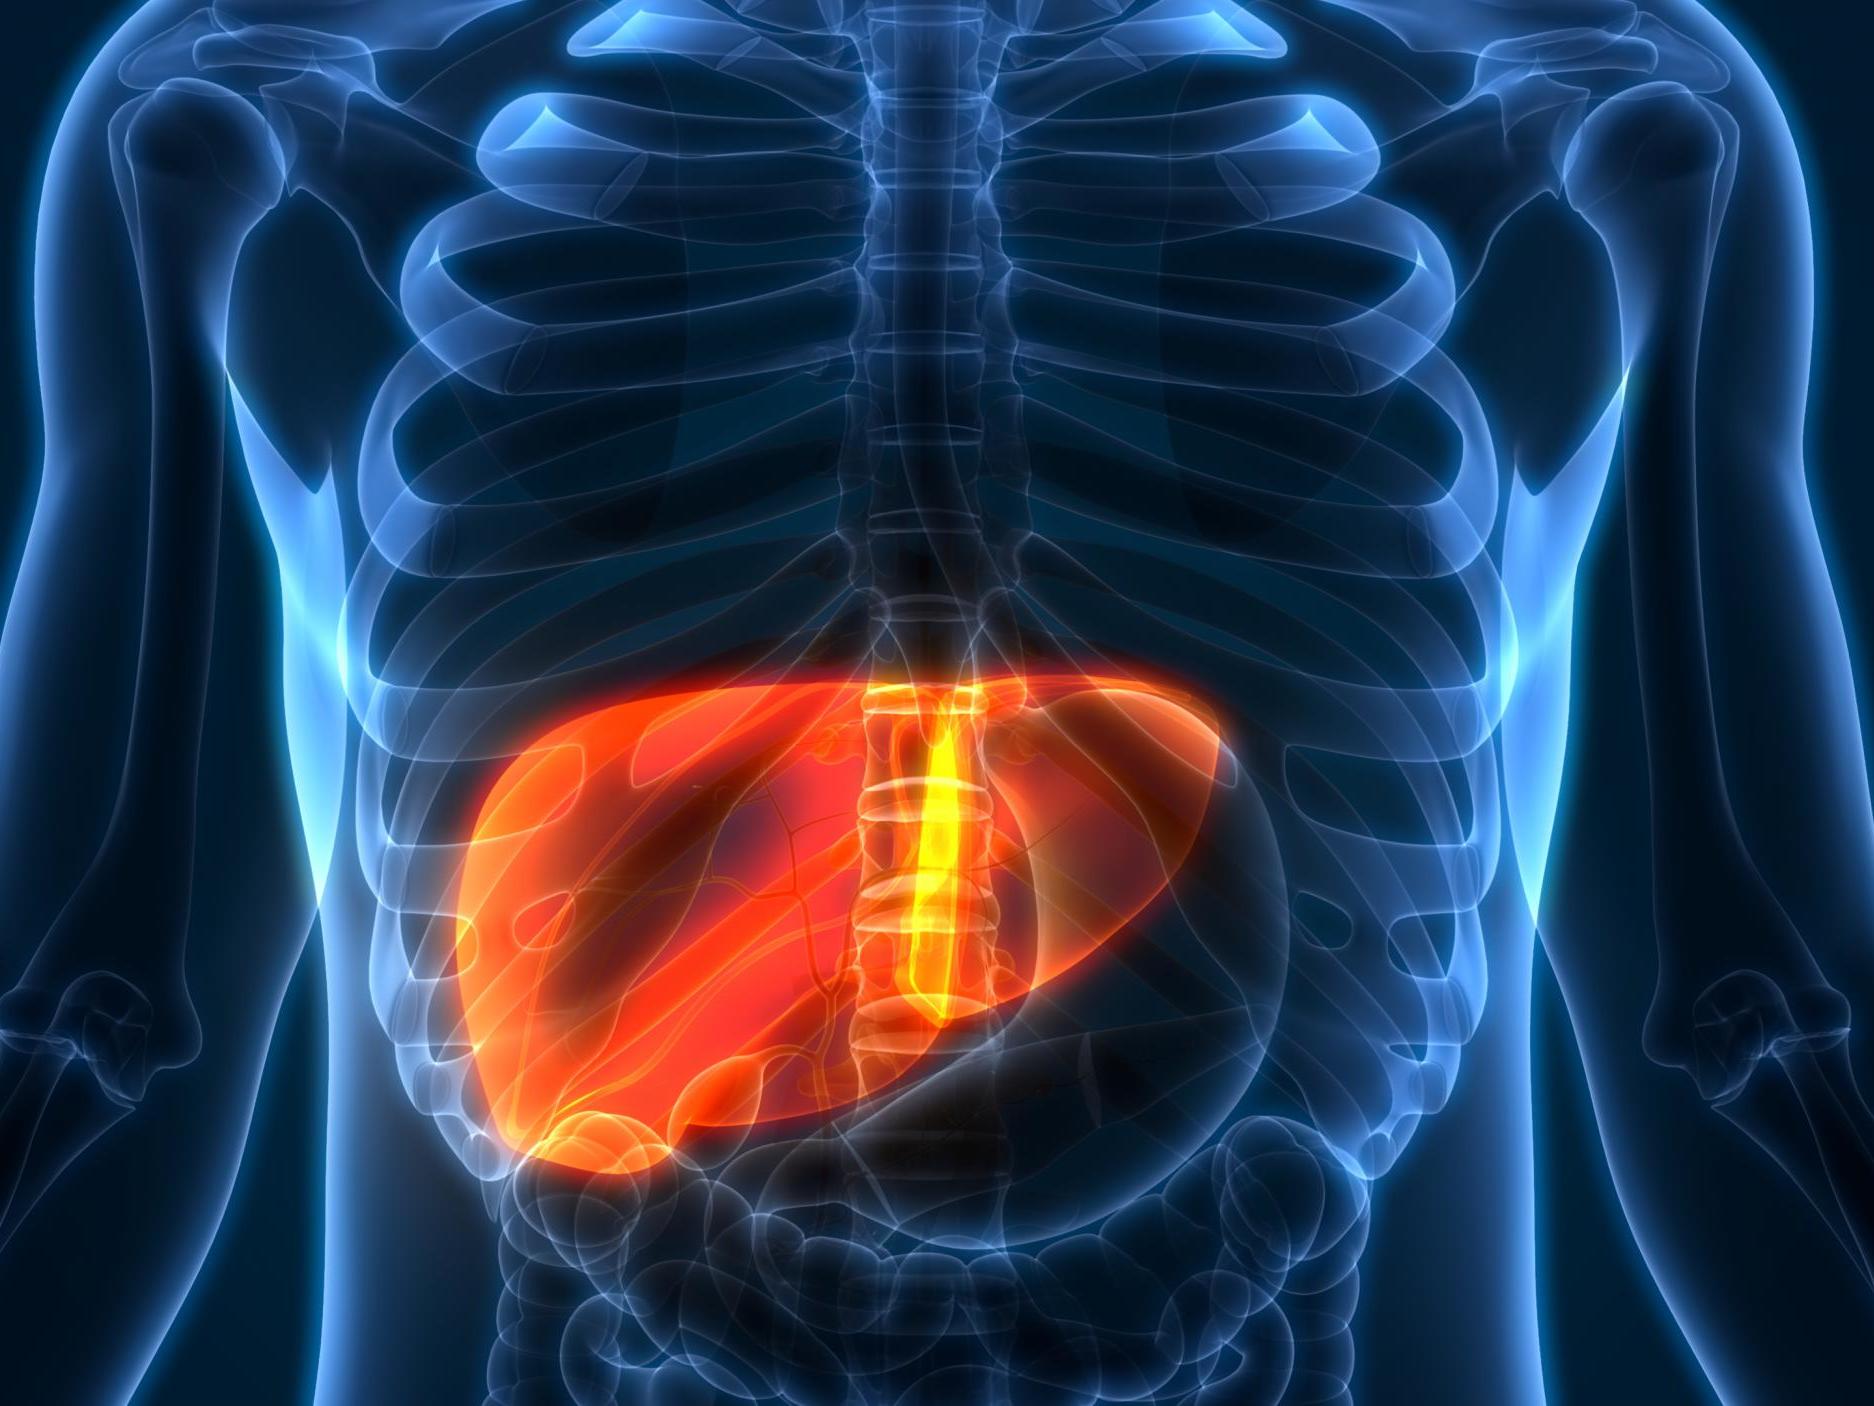 More than a third of liver cancer cases were diagnosed after an emergency